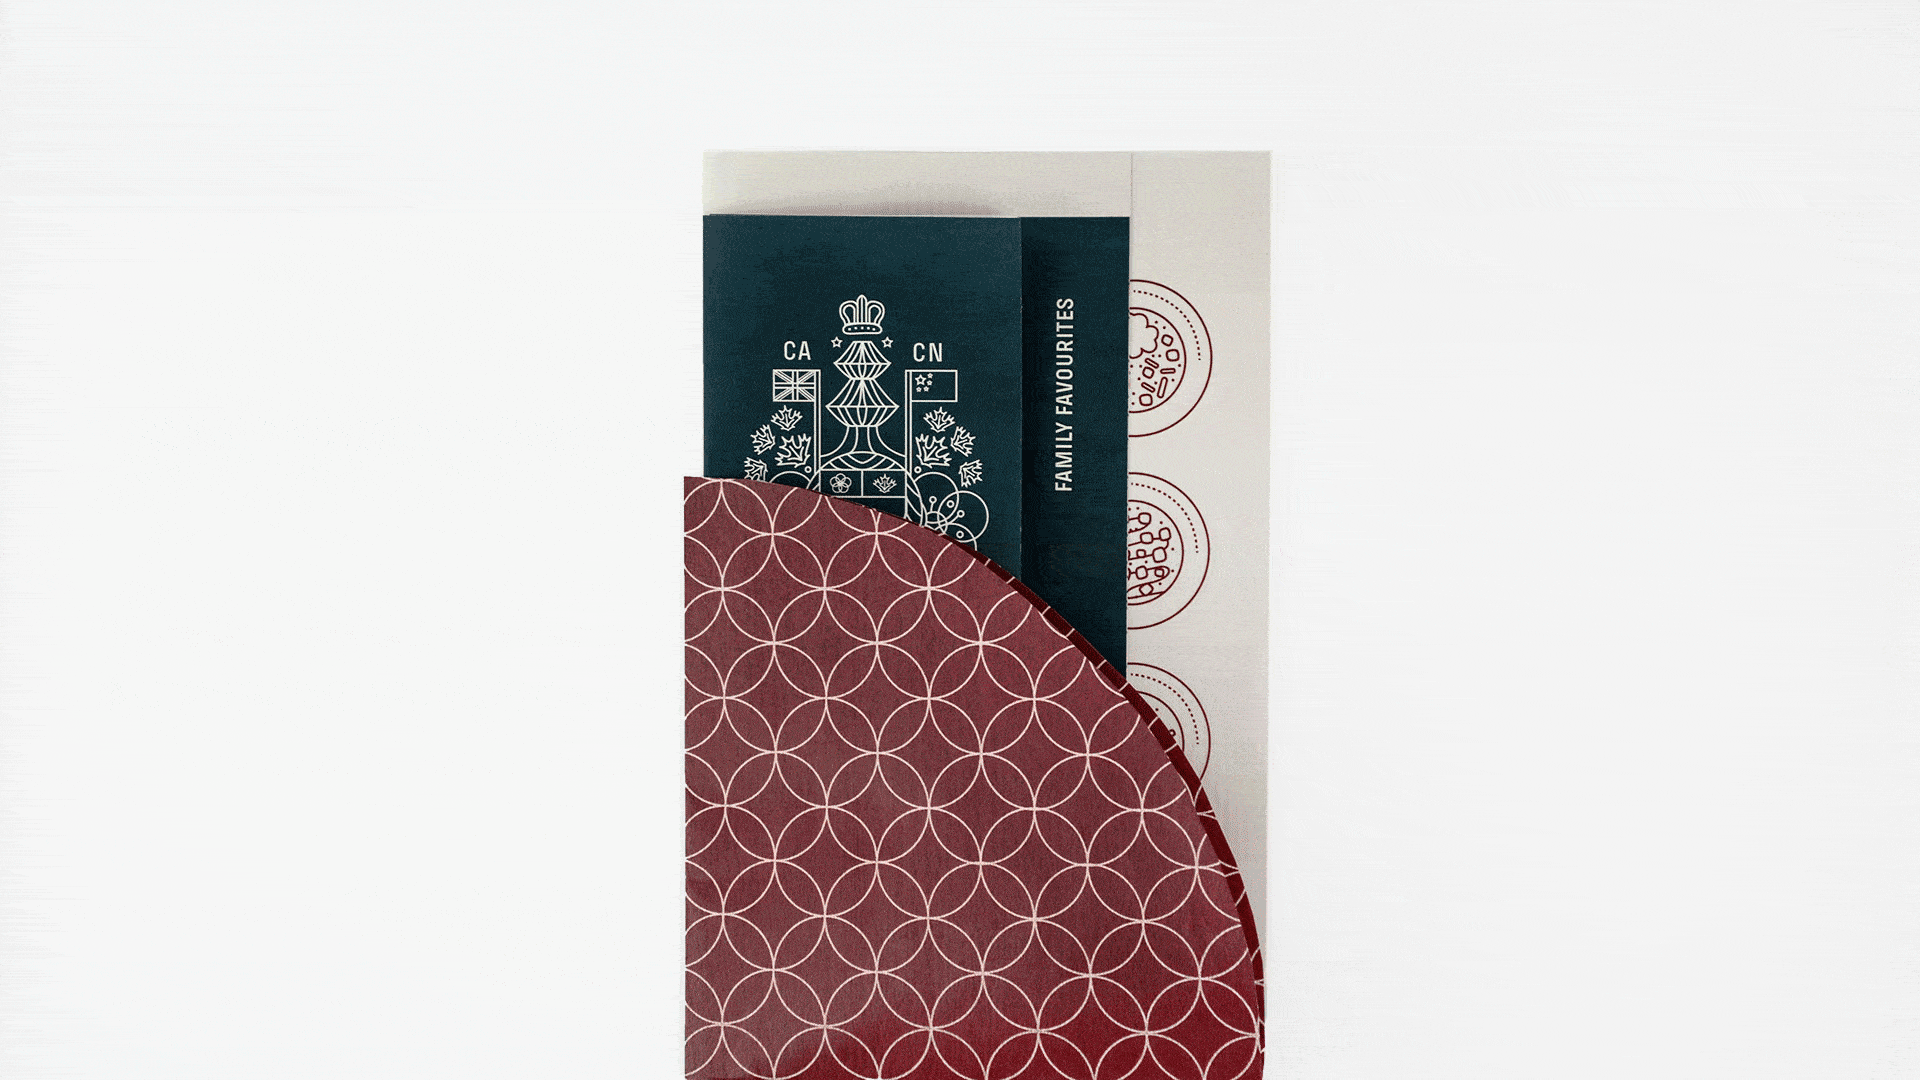 A menu design for a fusion Chinese restaurant that unfolds to reveal integrated brand origin stories and values.